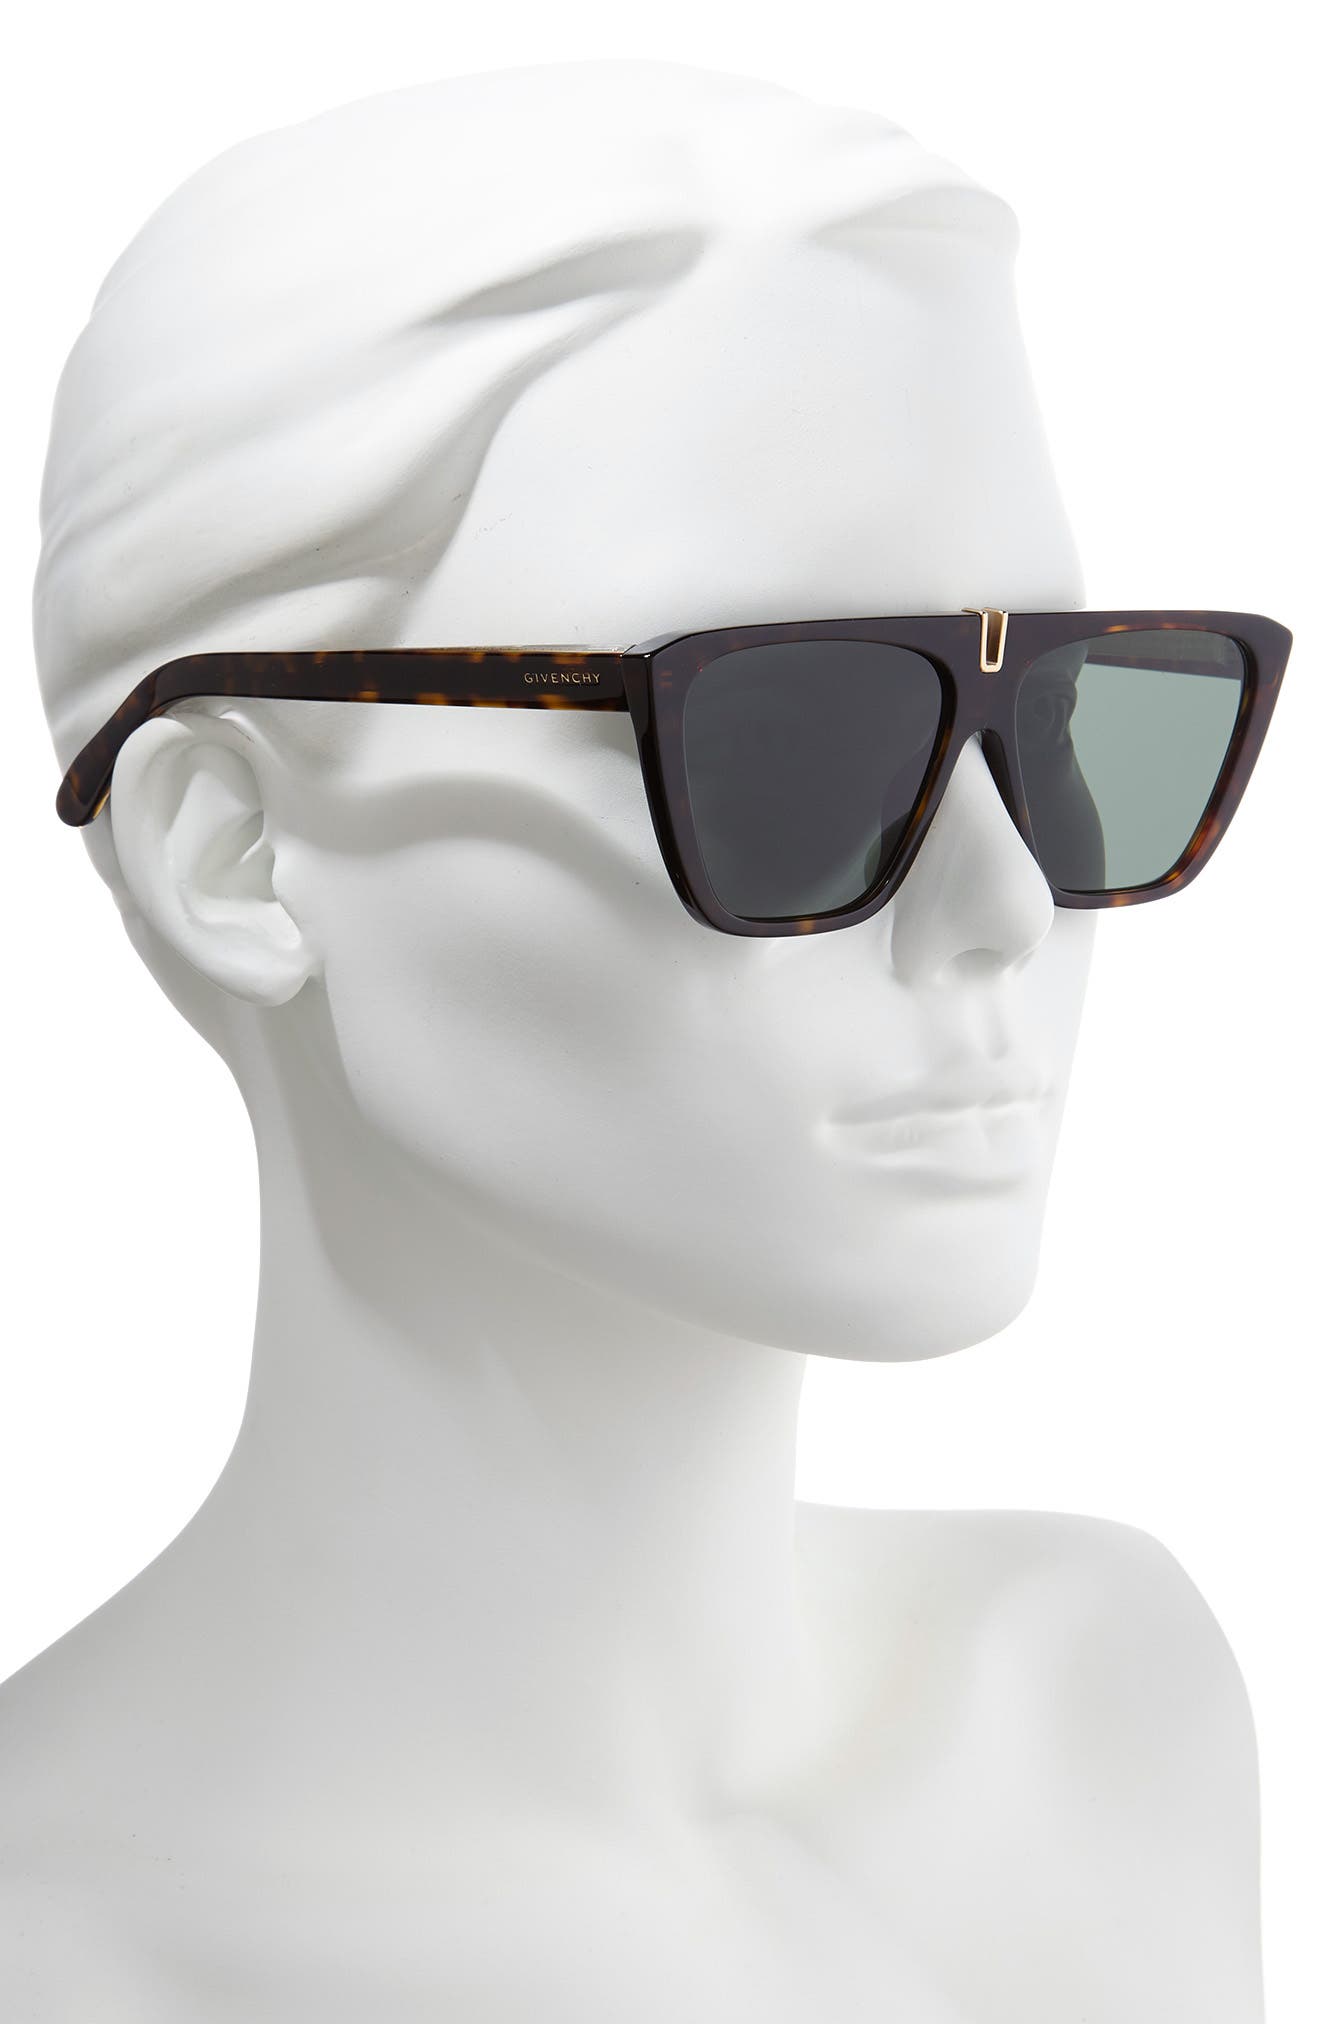 givenchy 58mm sunglasses